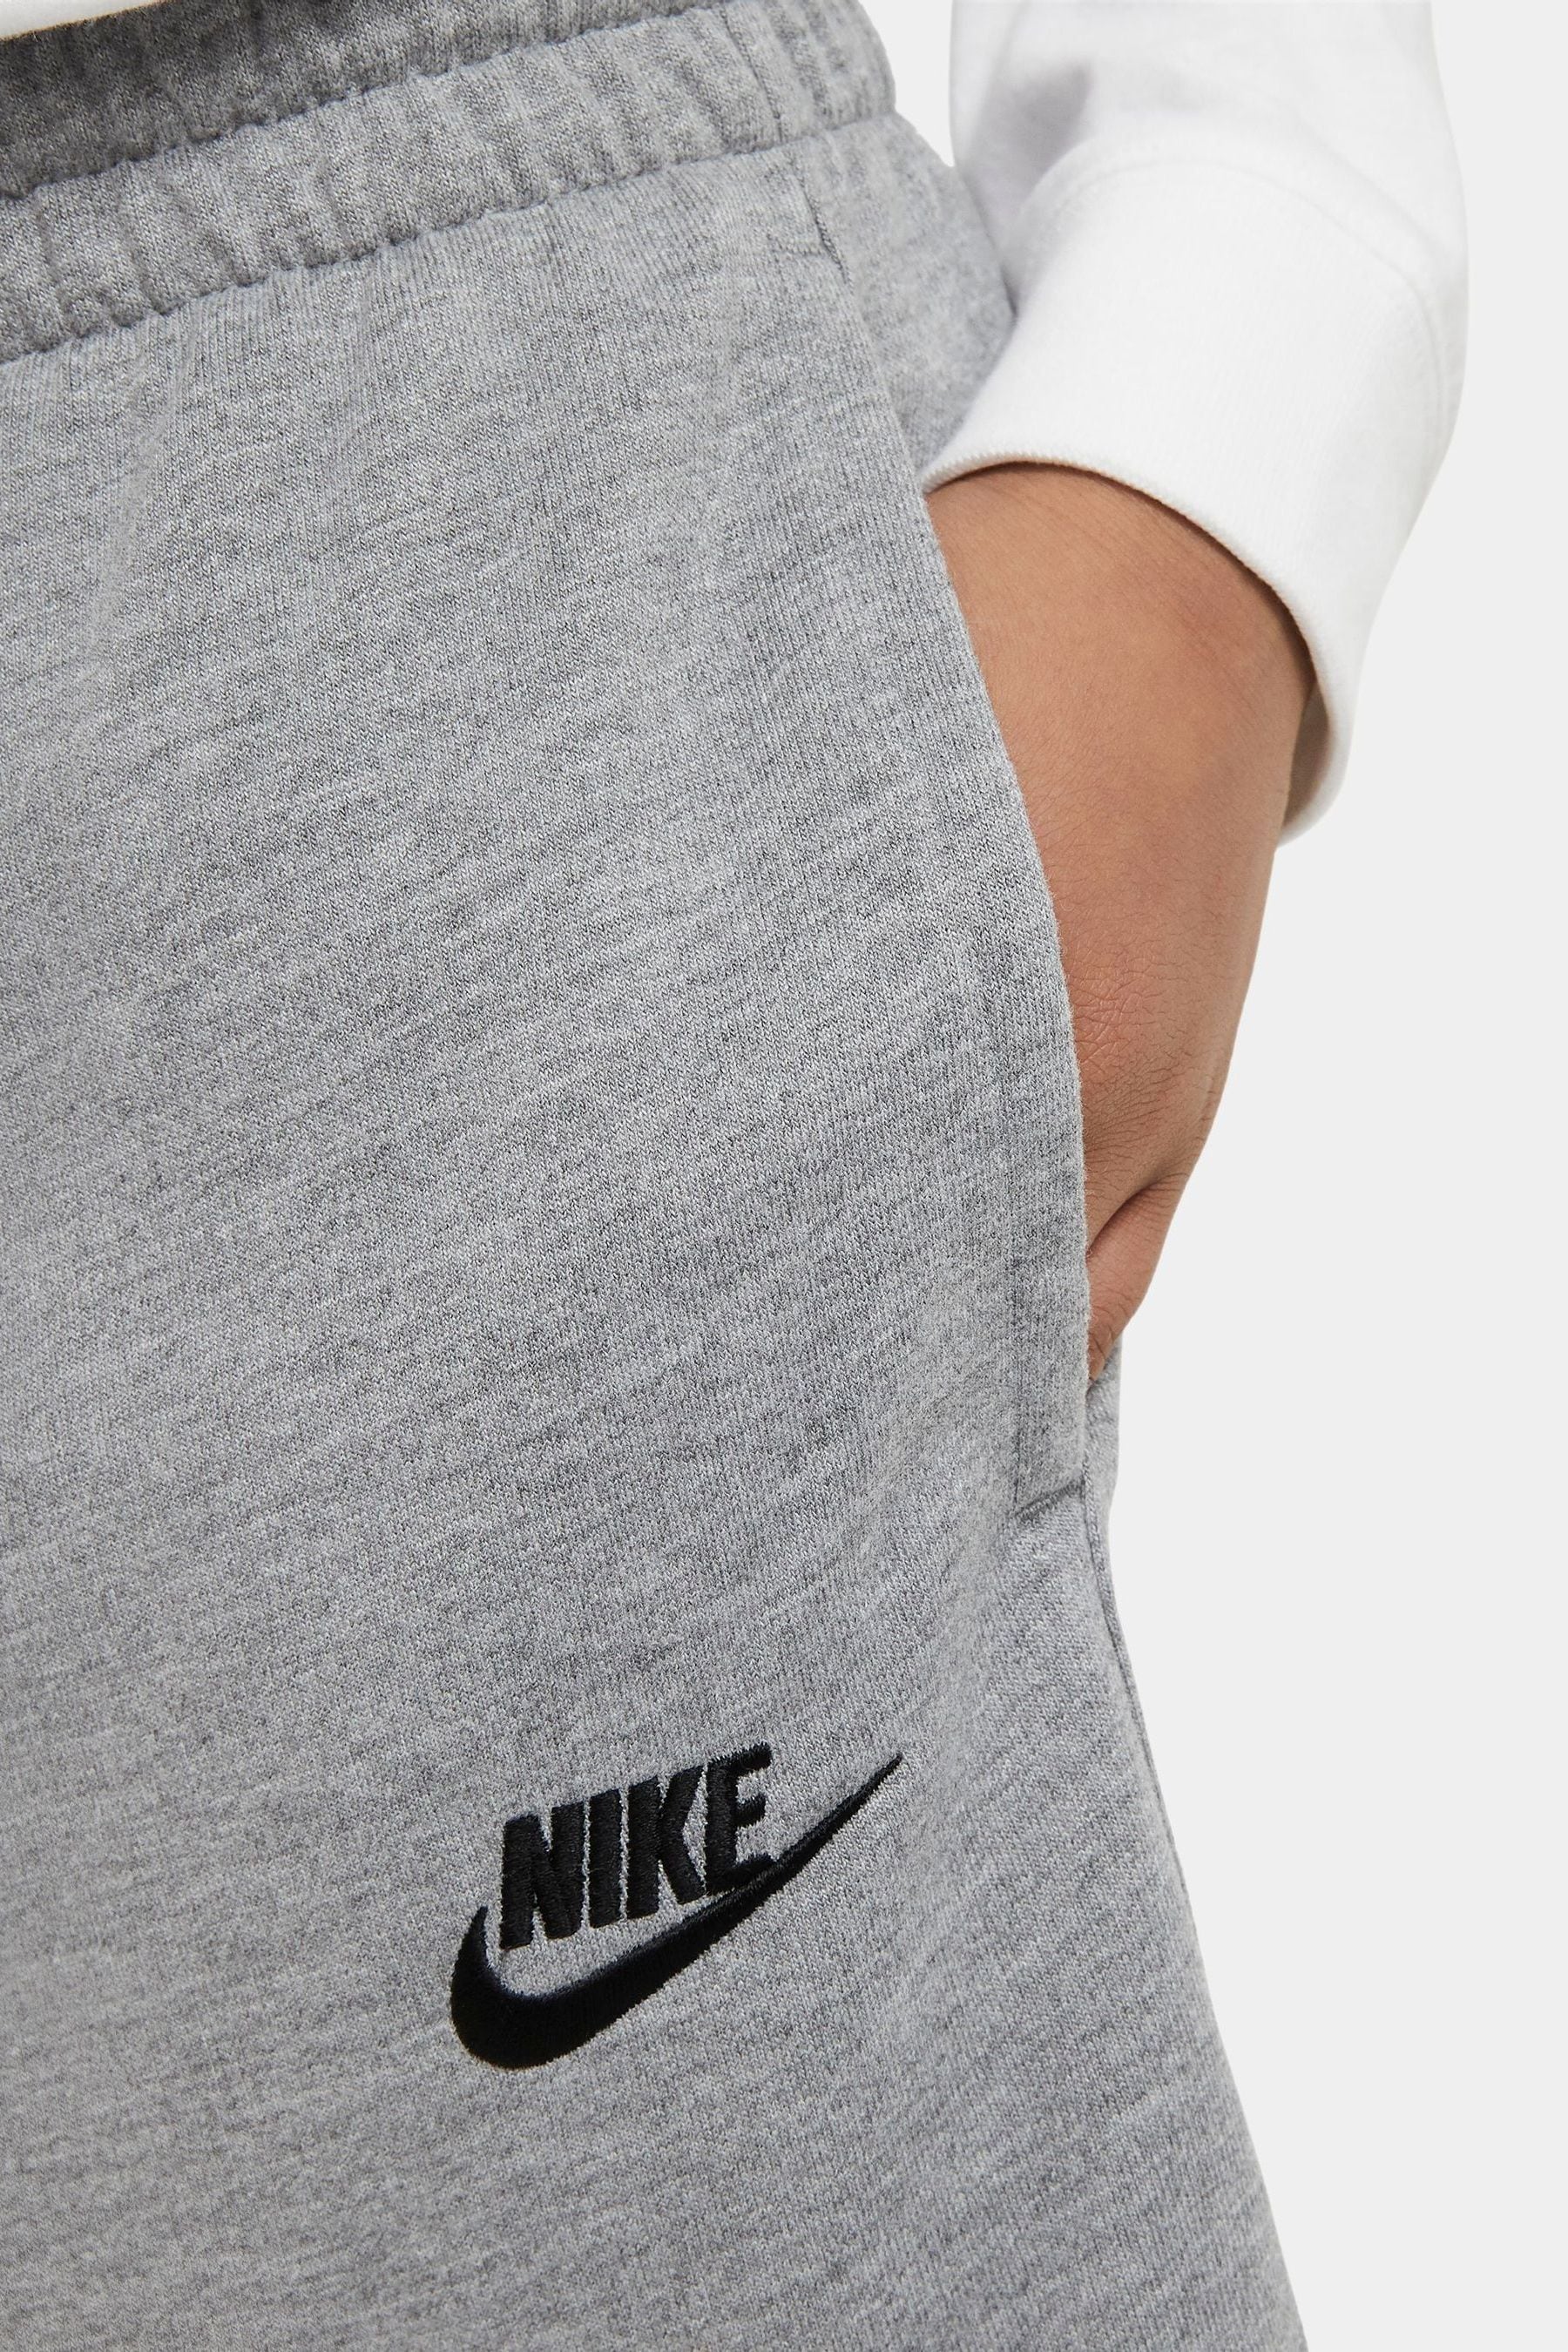 Buy Nike Grey Club Jersey Shorts from the Next UK online shop